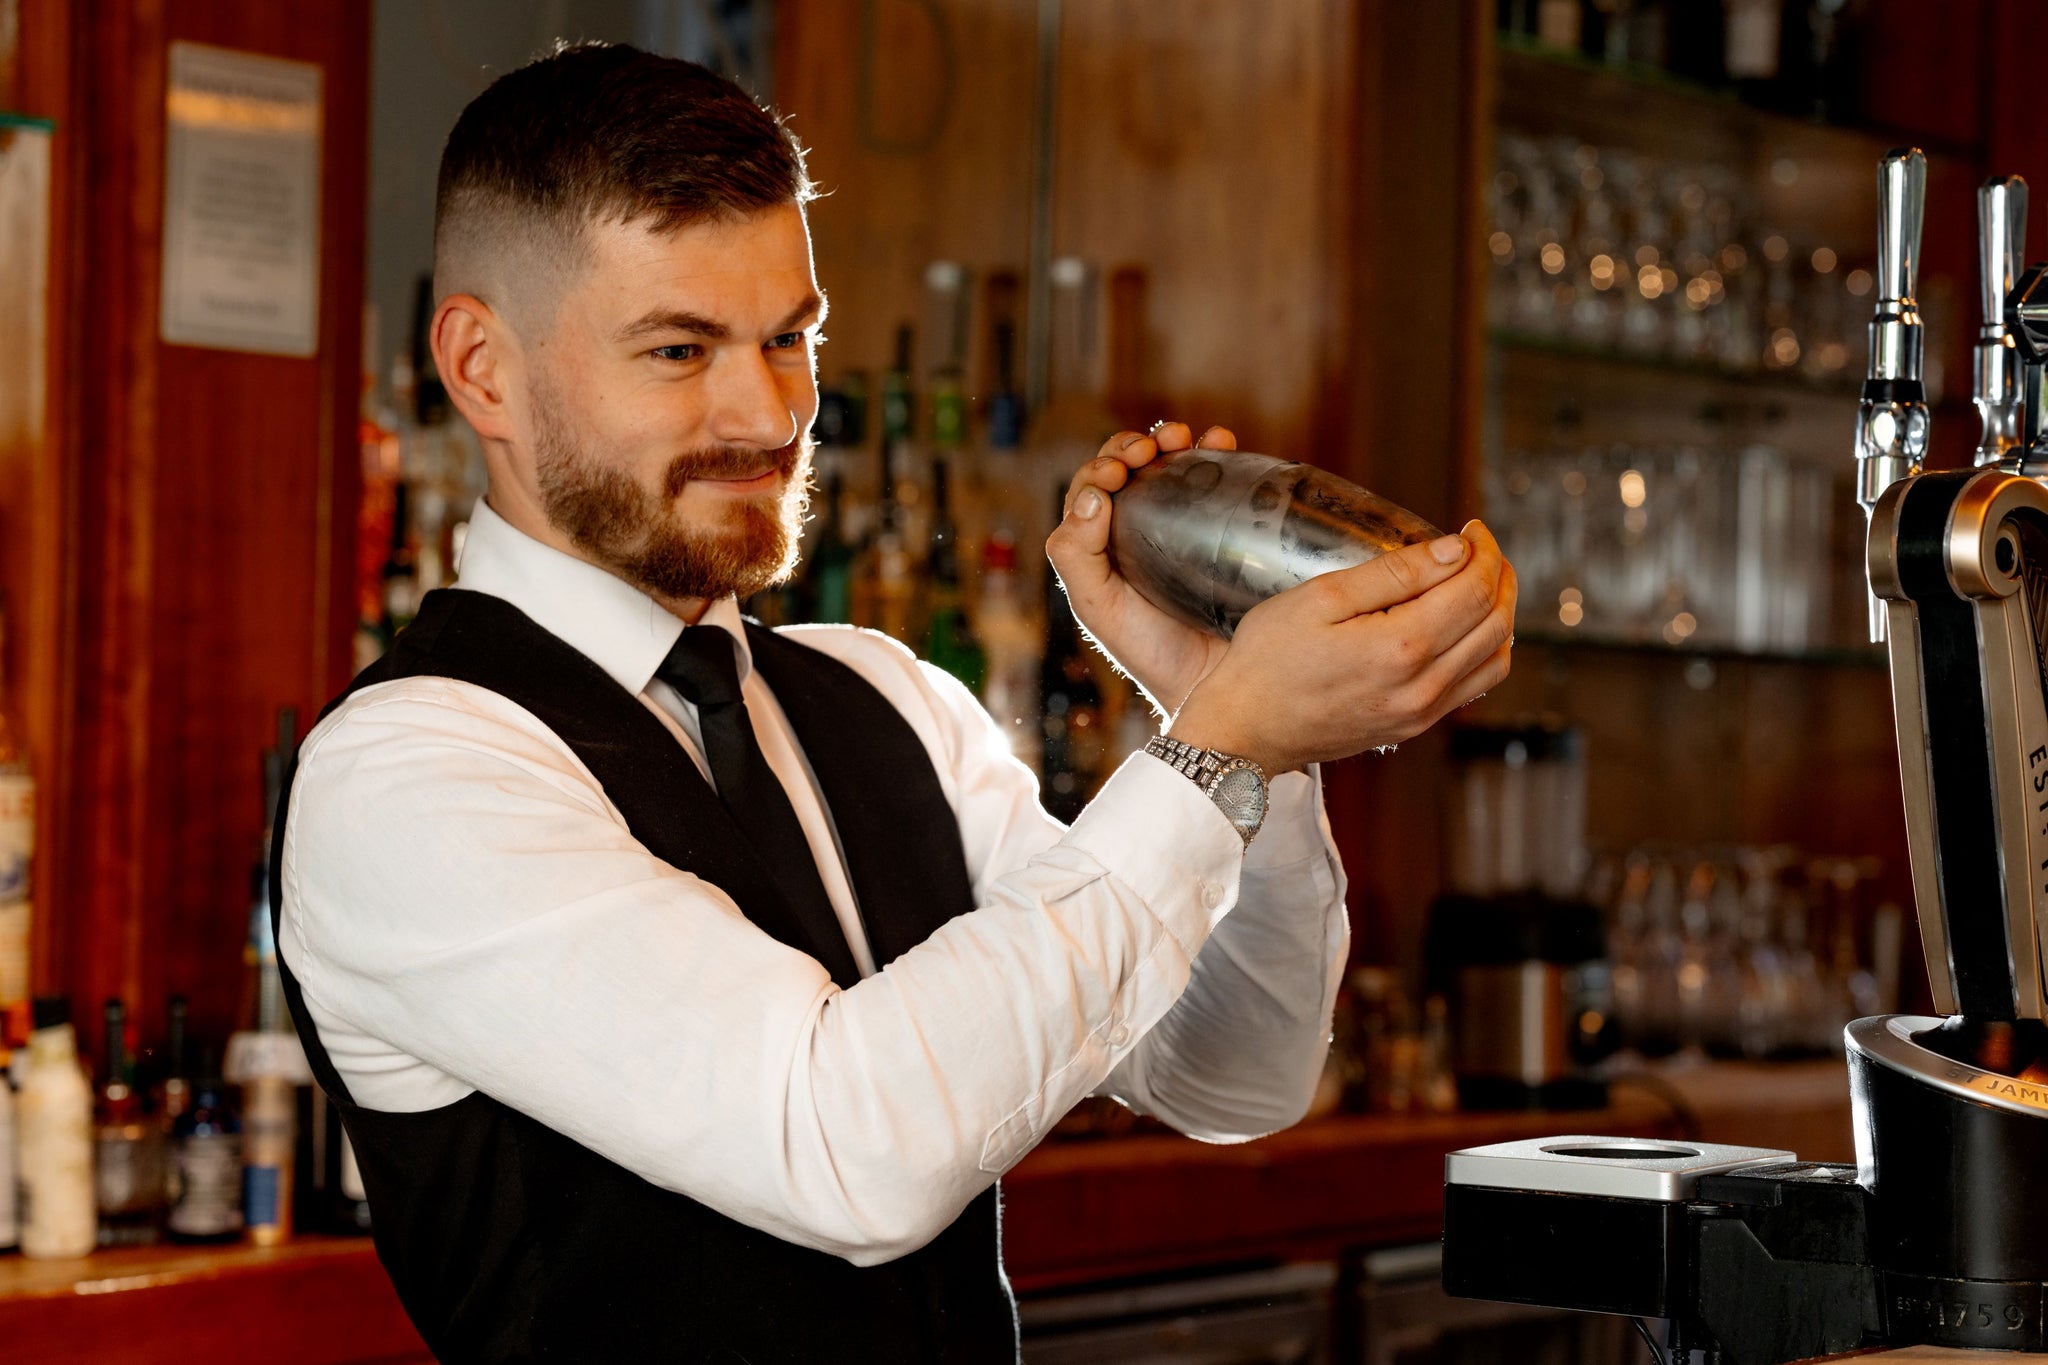 Dress to Impress (The style of a bartender)